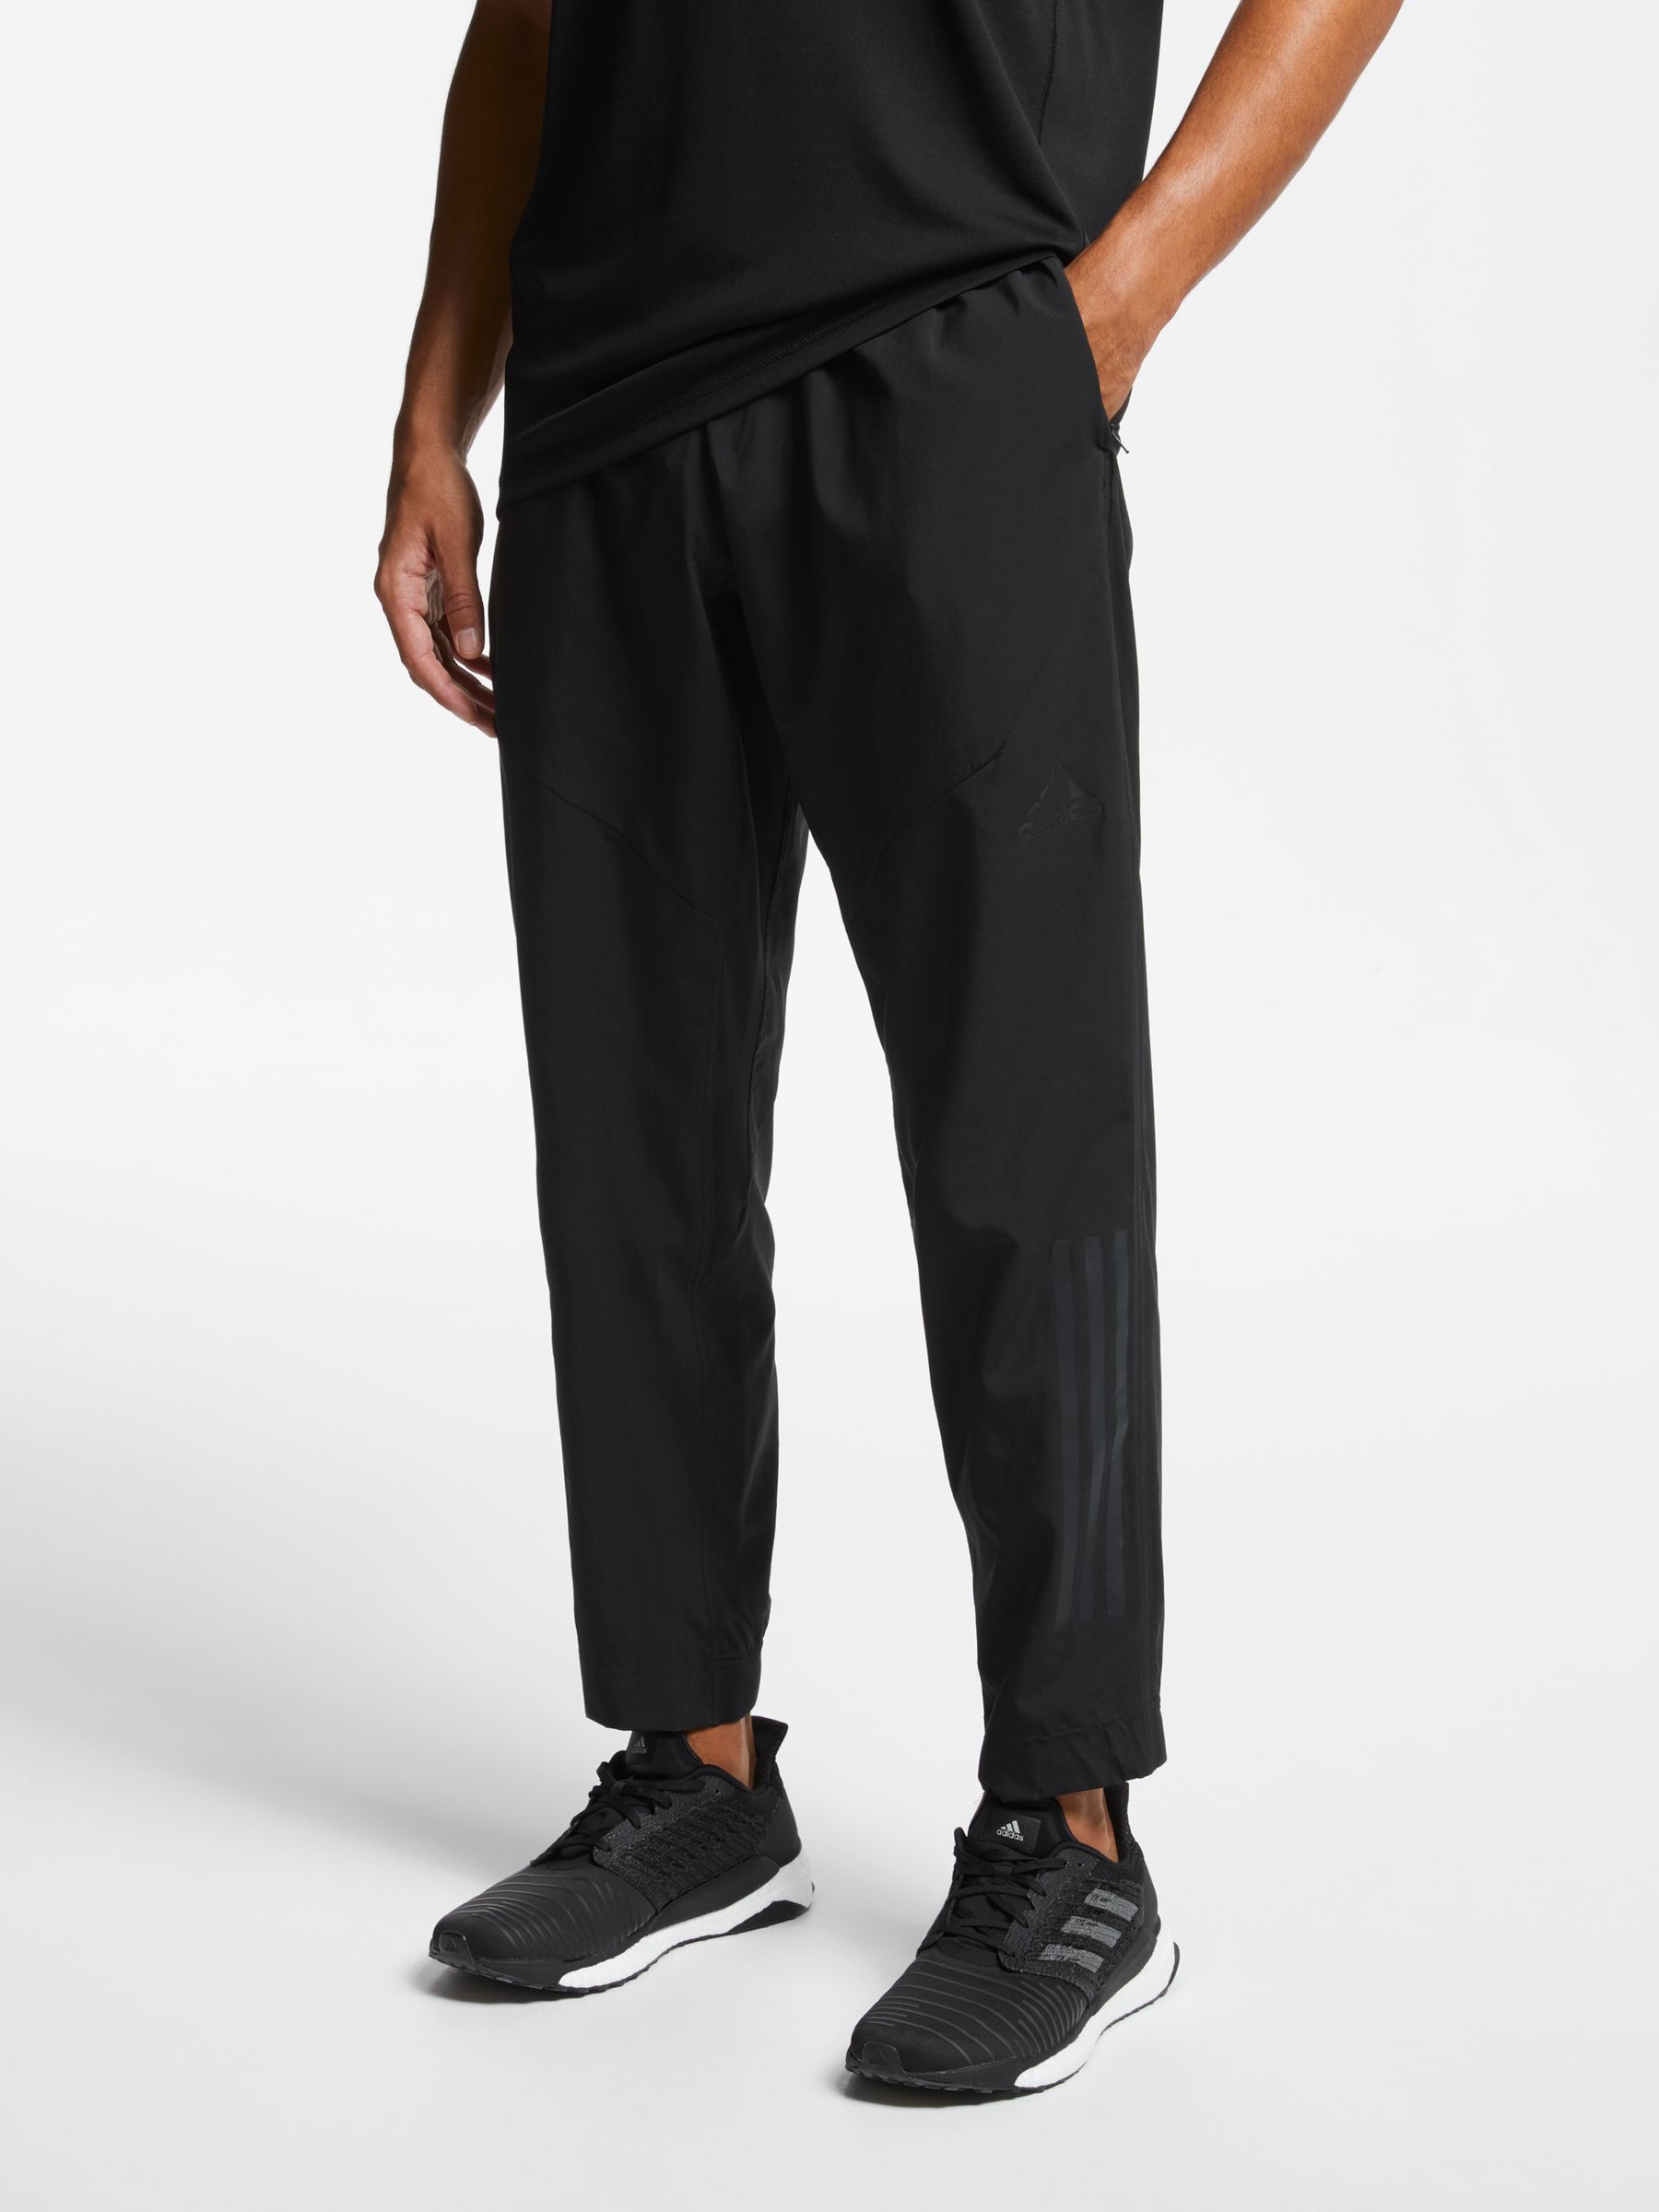 adidas climacool tracksuit bottoms mens